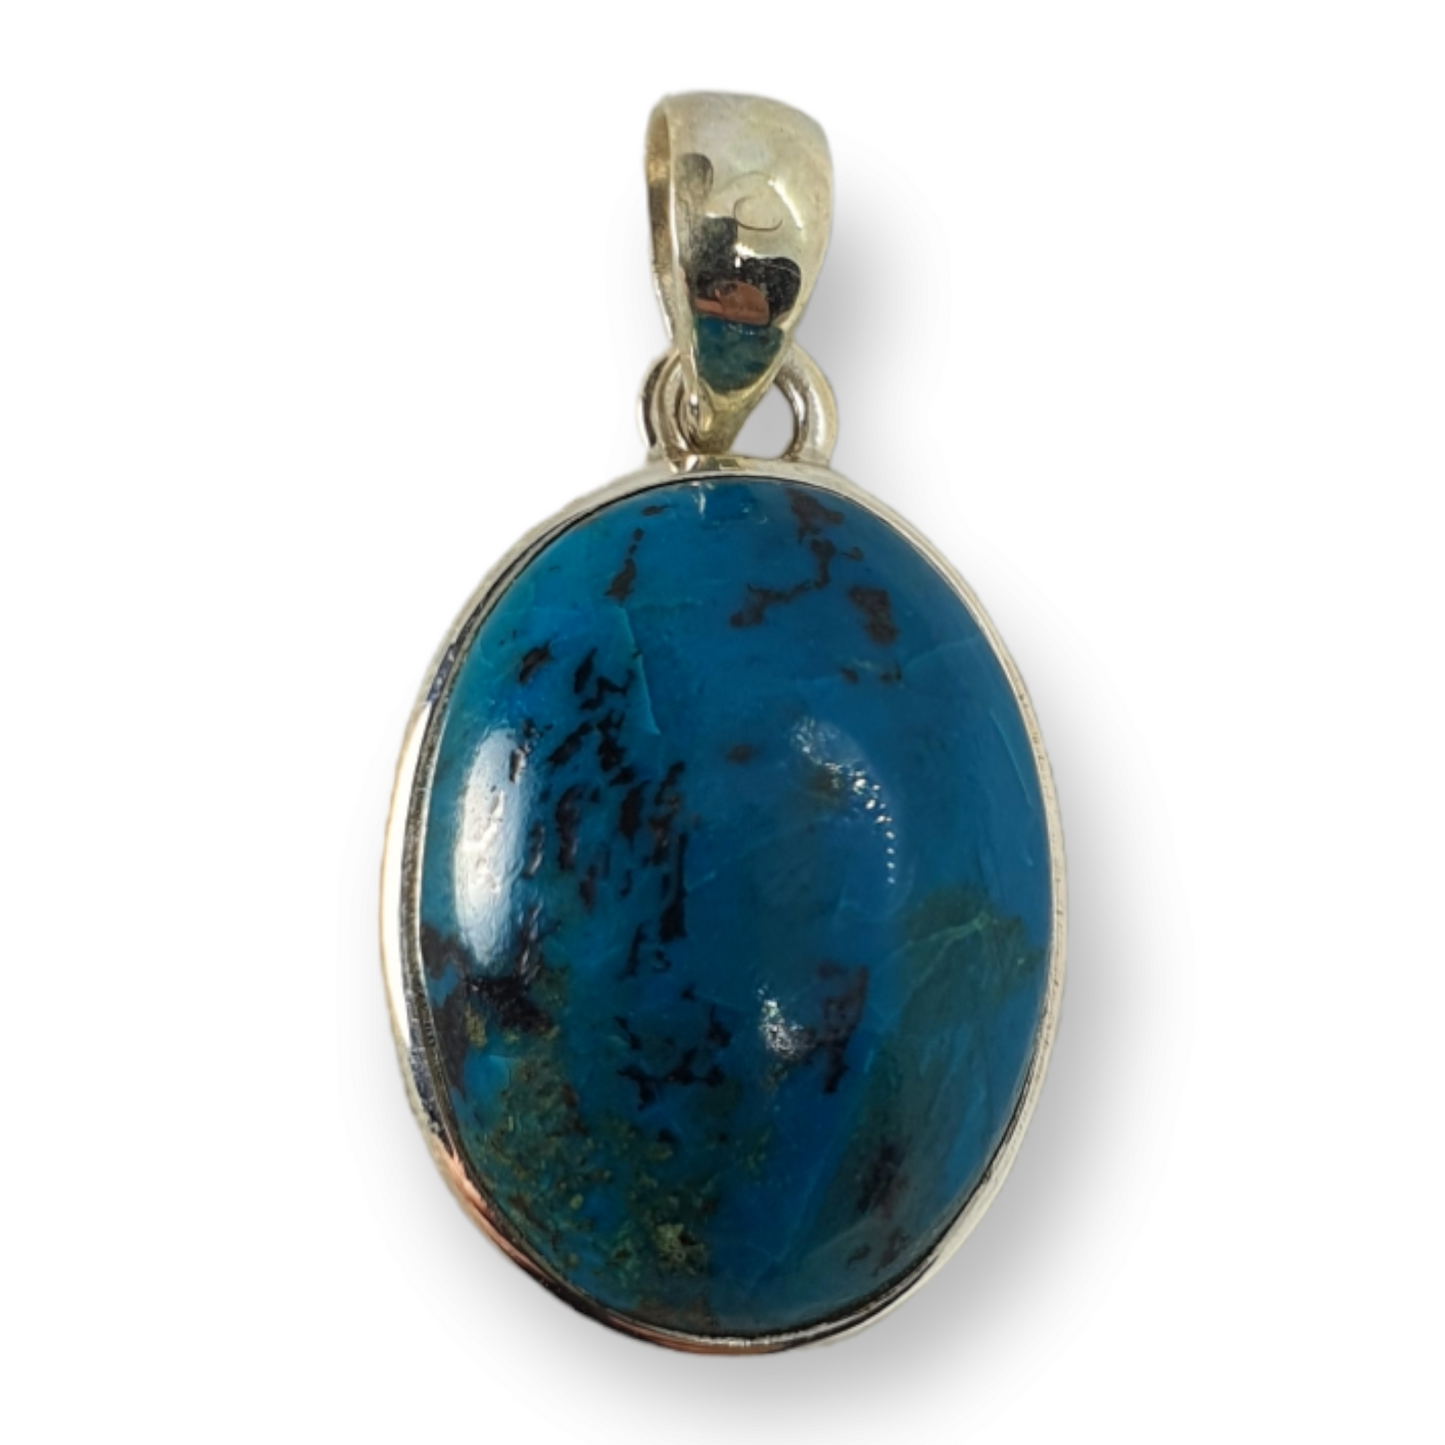 Crystals - Chrysocolla Cabochon Oval Pendant - Sterling Silver